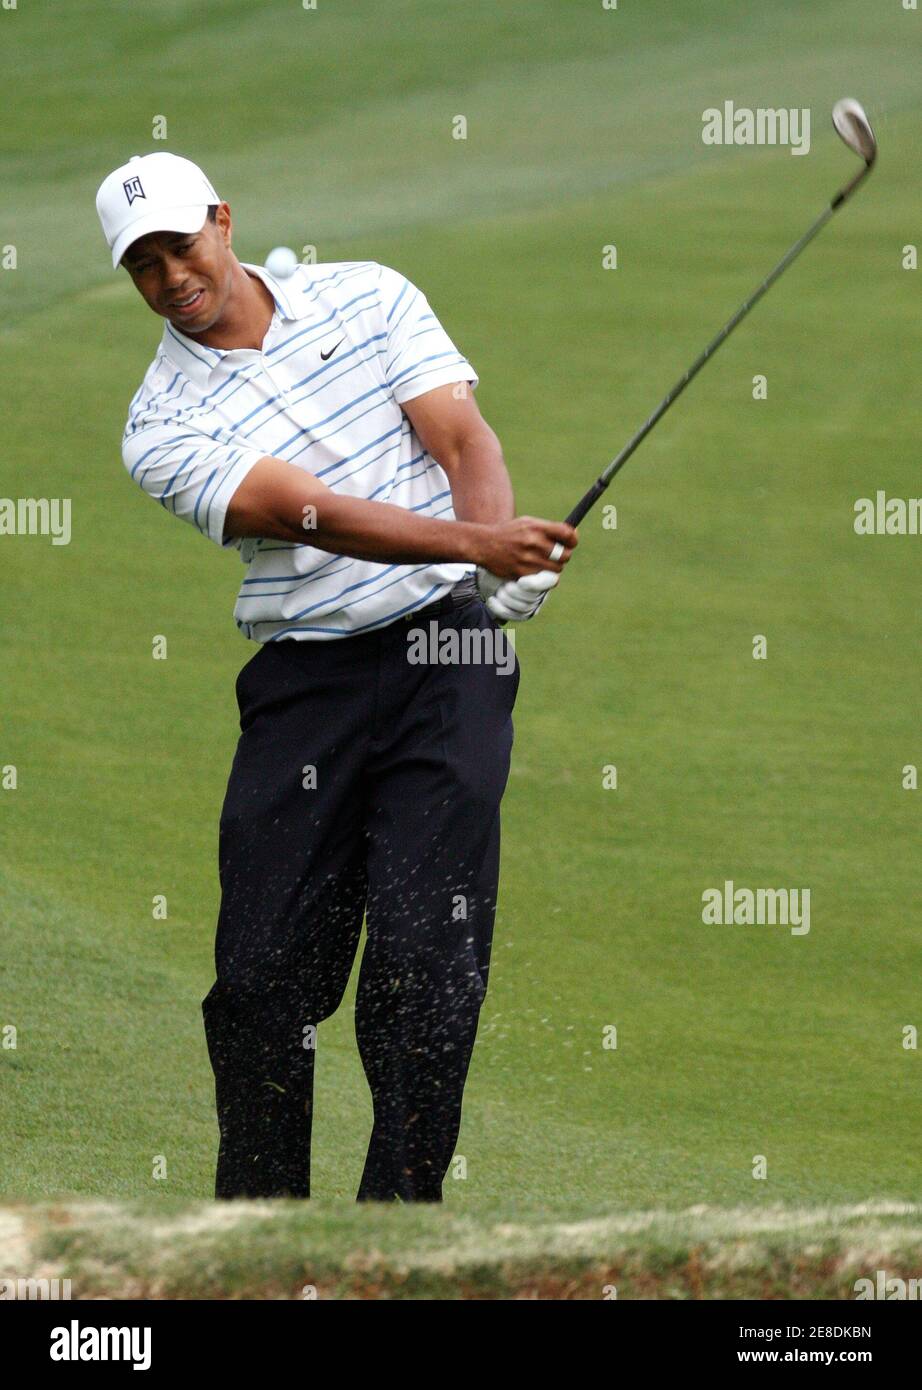 Tiger Woods of the U.S. chips to the 10th green during first round play in the Quail Hollow Championship in Charlotte, North Carolina, April 30, 2009.     REUTERS/Jason Miczek (UNITED STATES SPORT GOLF) Stock Photo